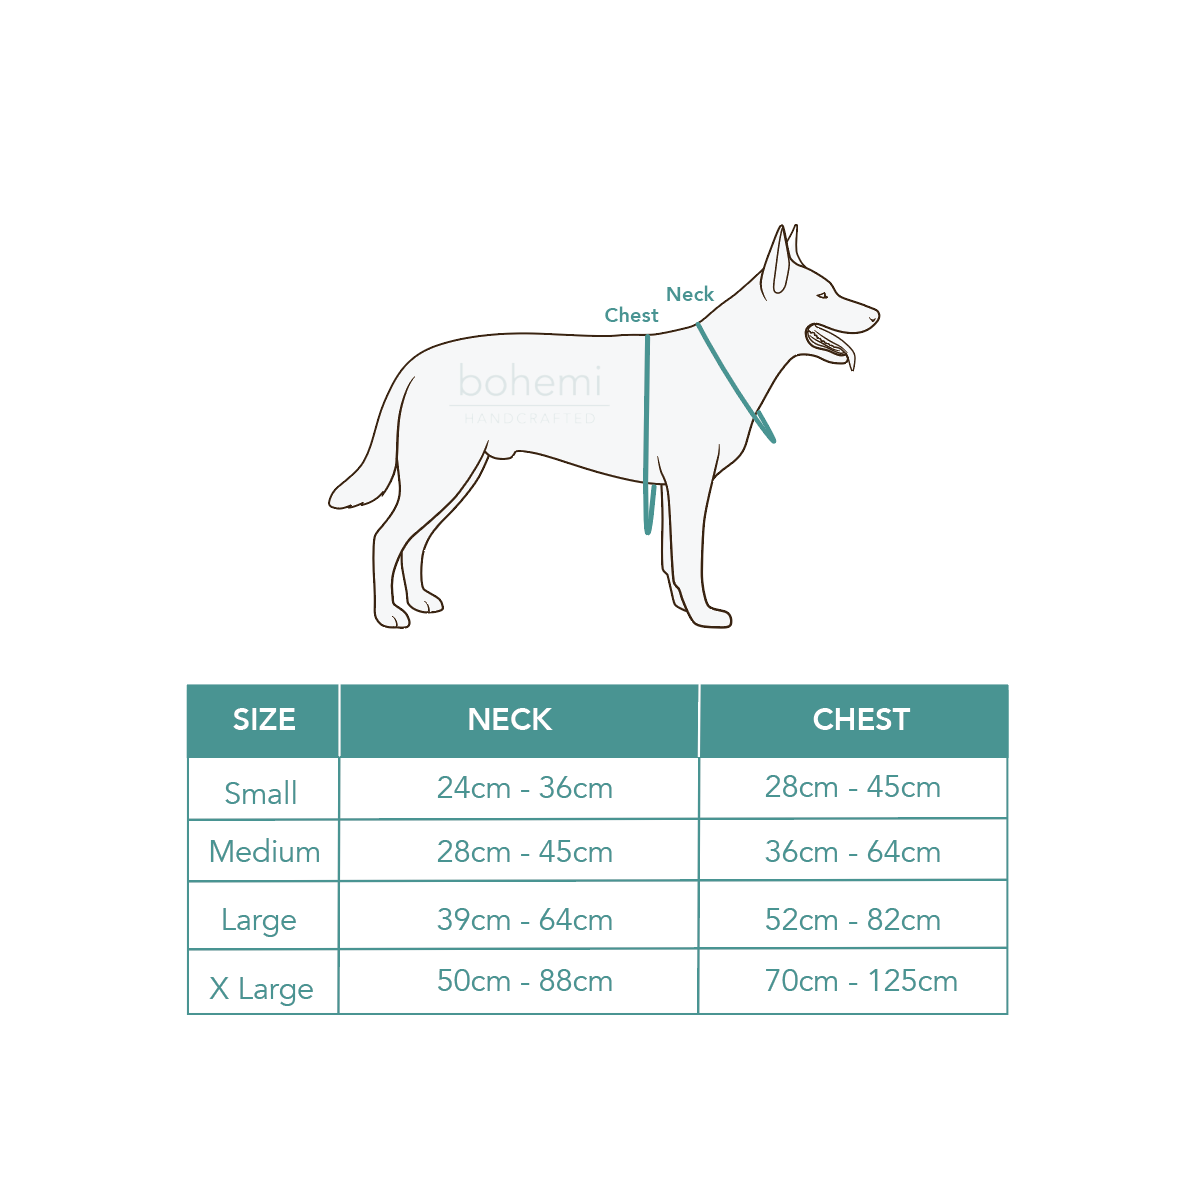 bohemi harness size guide and picture of how to measure dog